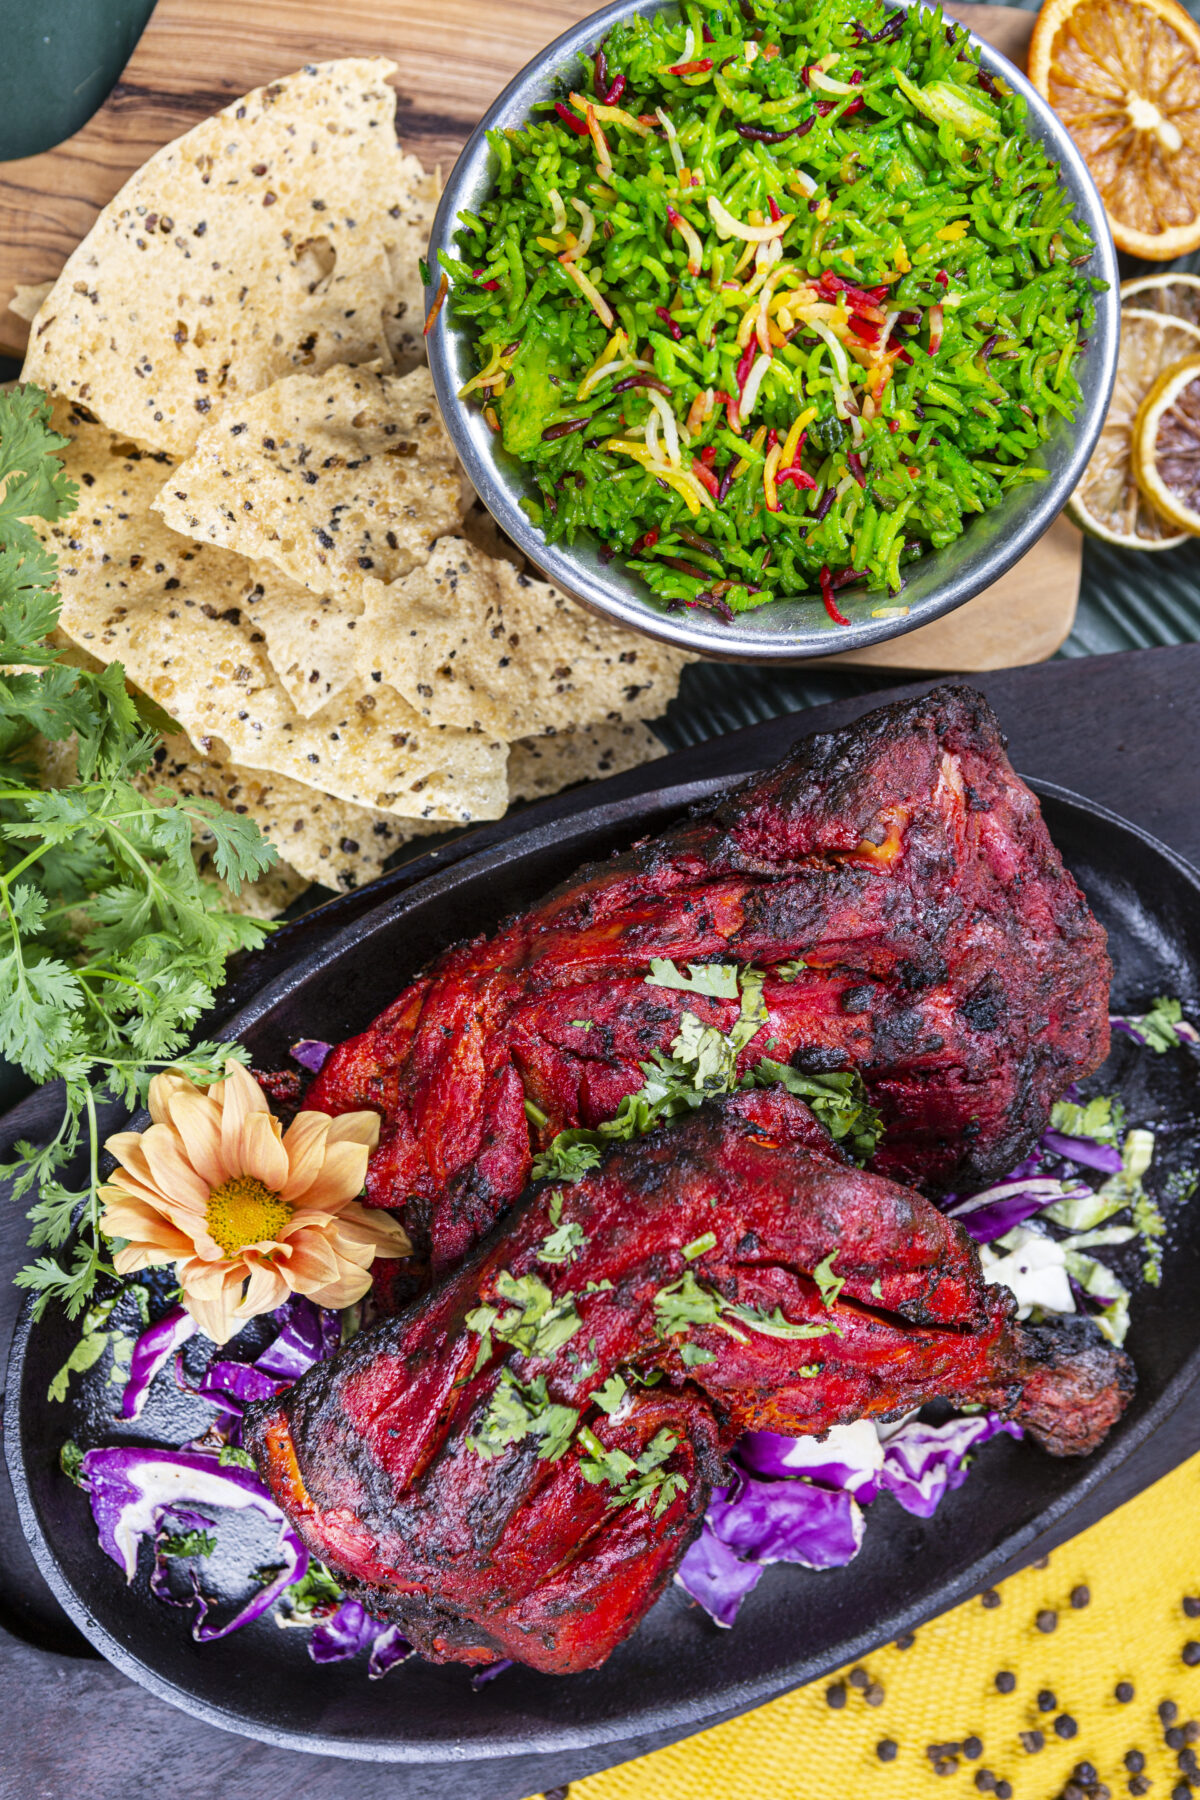 An Indian Barbecue at Cocktail Hour